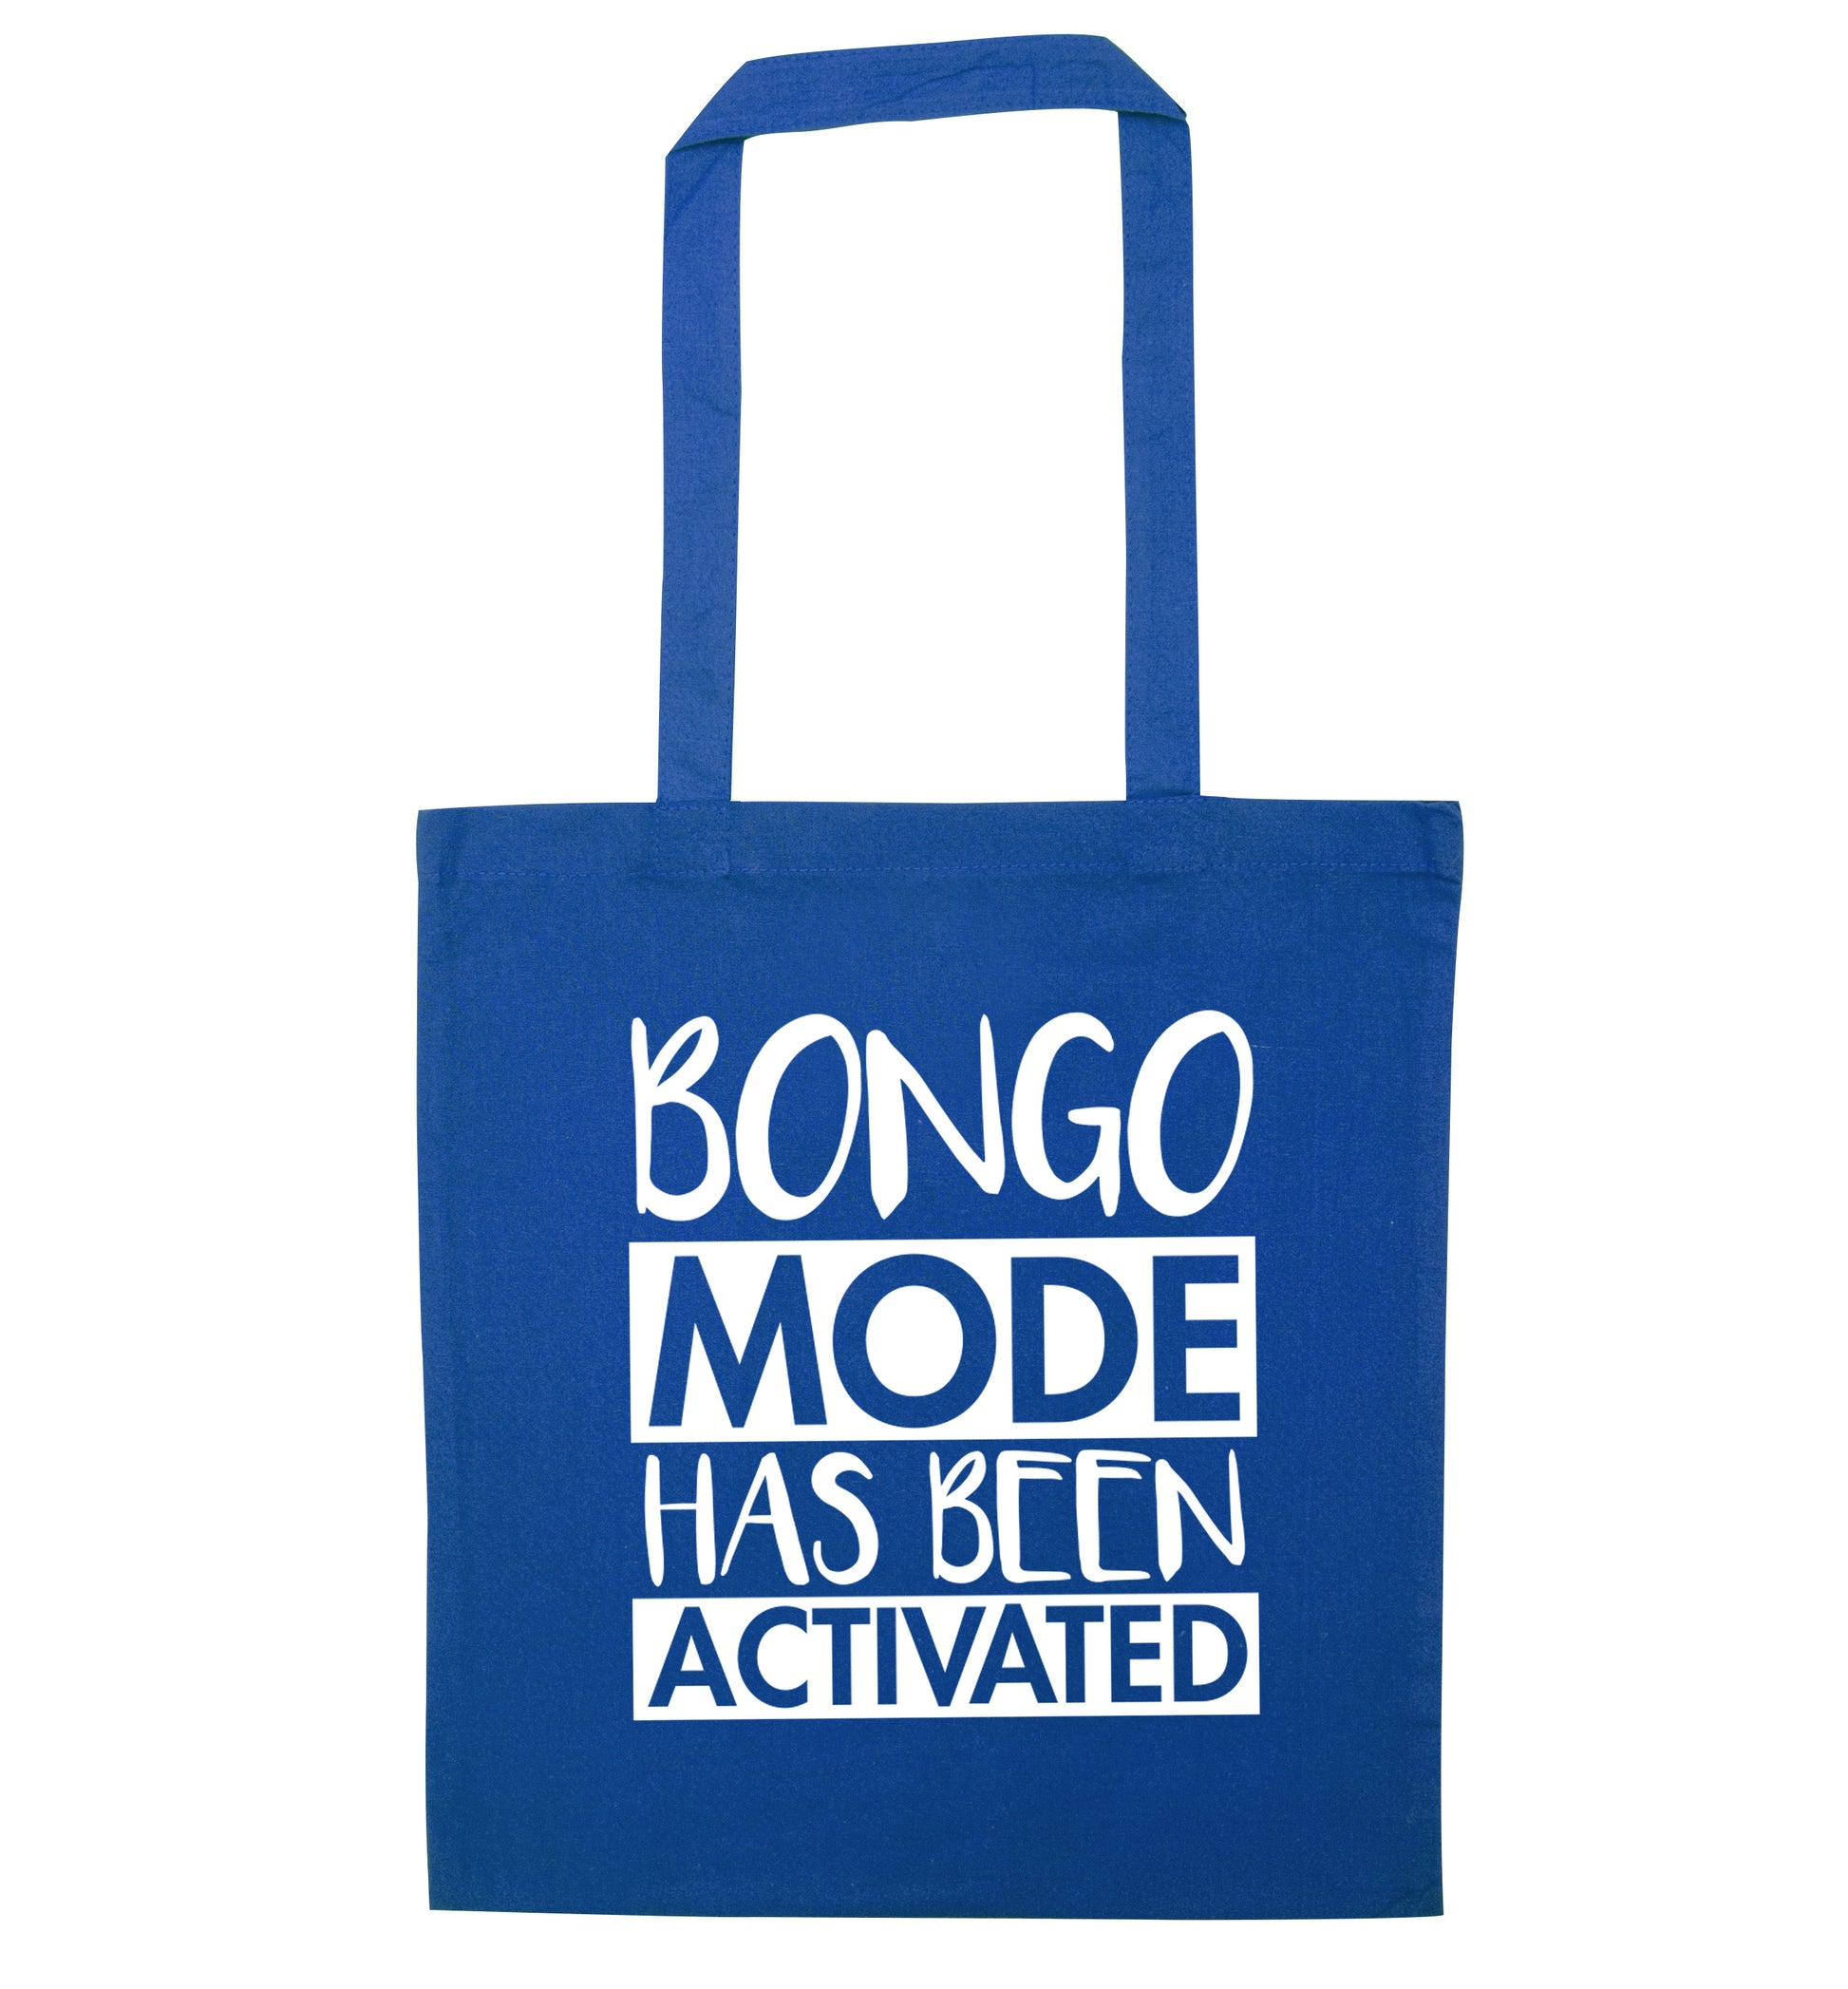 Bongo mode has been activated blue tote bag